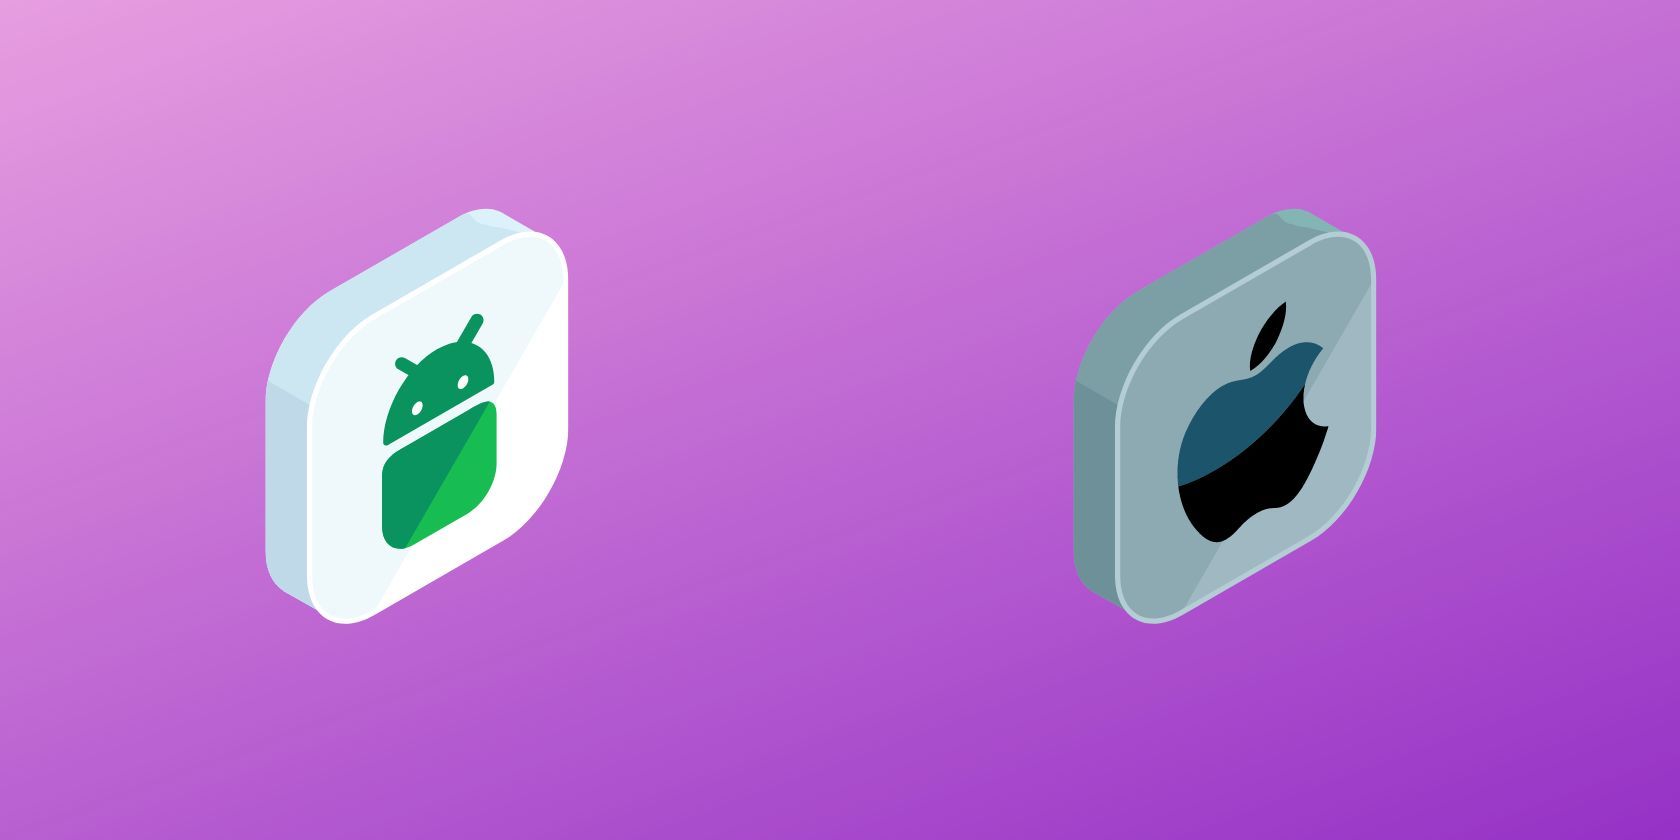 Android and Apple logos seen on purple background